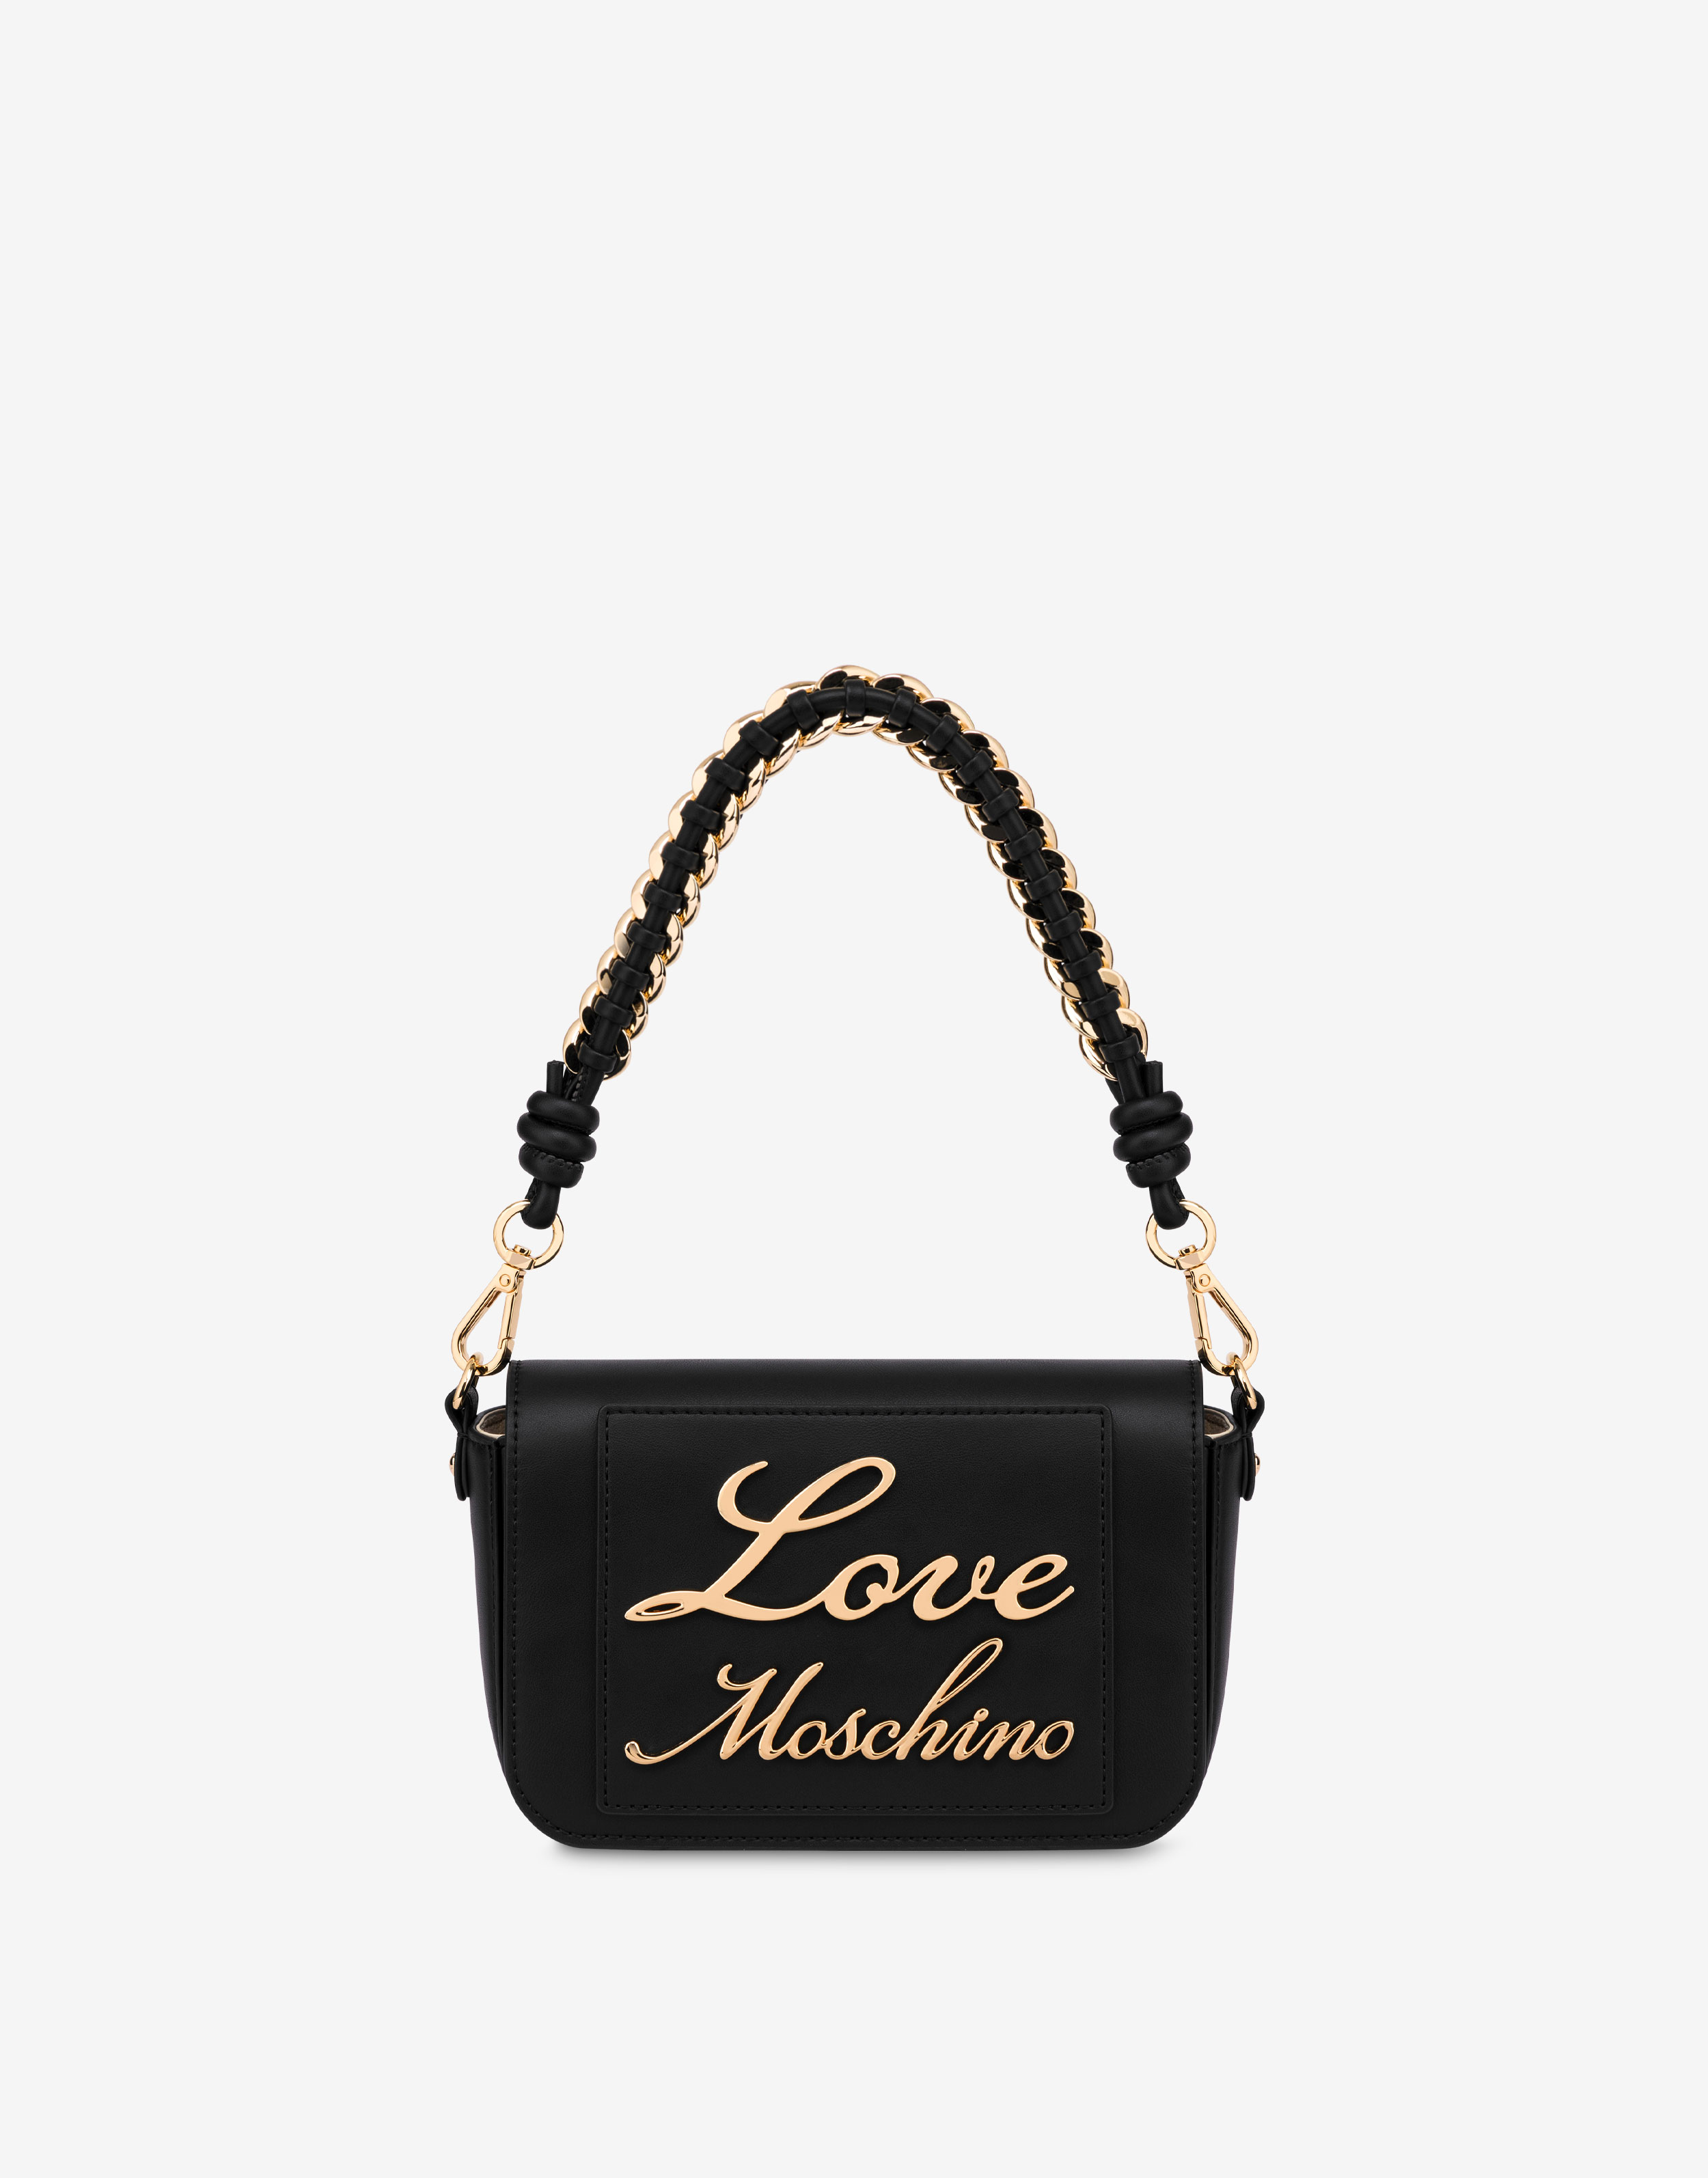 Moschino Bag Is a Roll of Toilet Paper - Toilet Paper Bag at Fashion Week